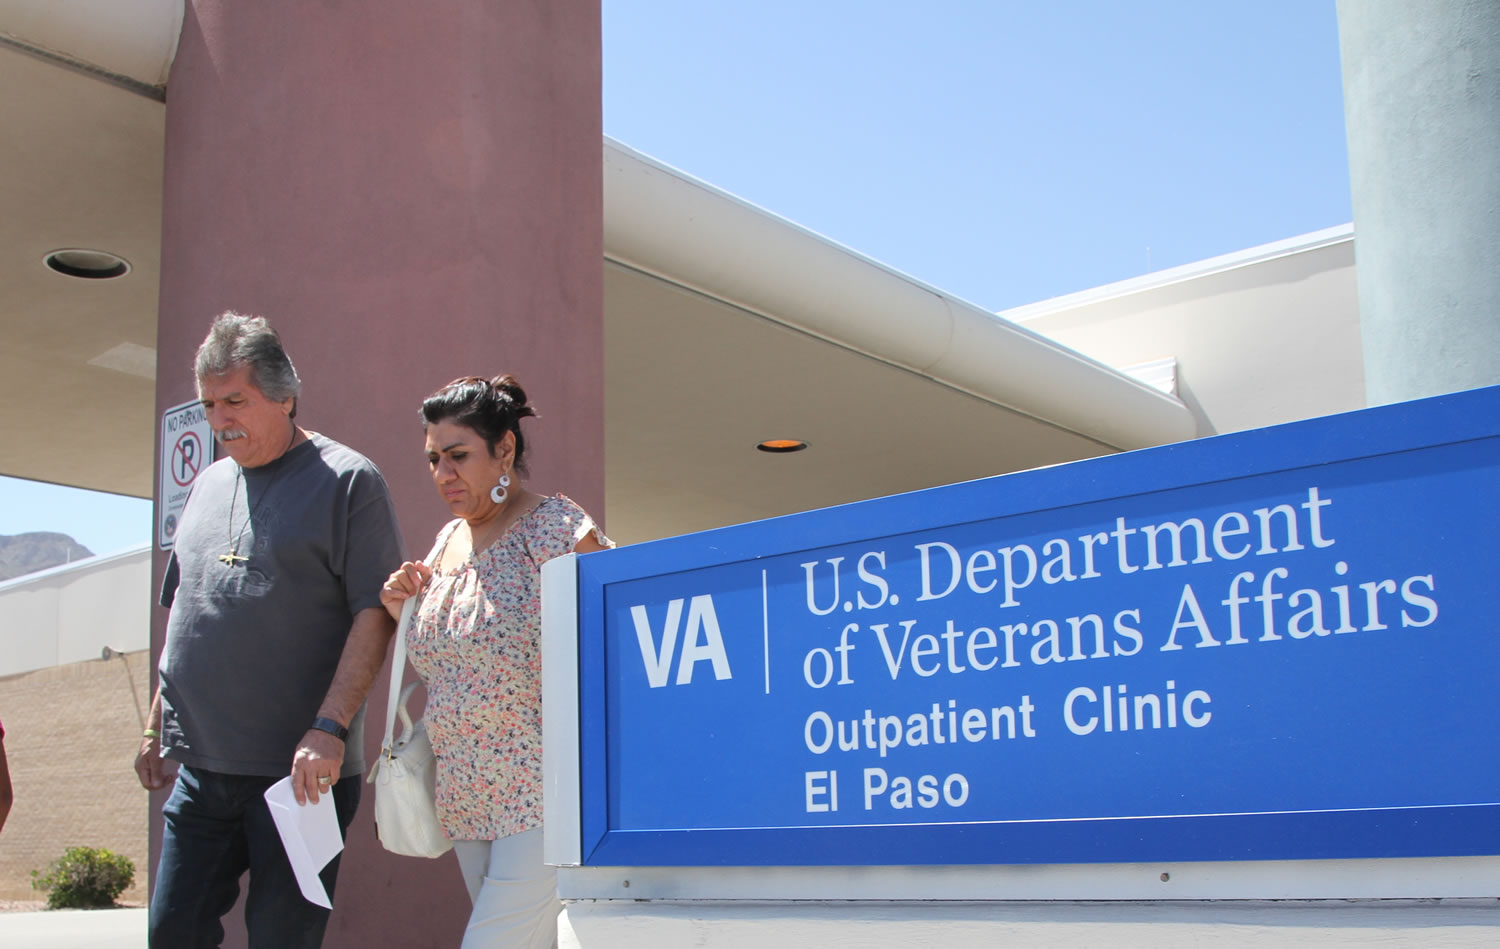 David and Marianne Trujillo exit the Vetaran Affairs facility in El Paso, Texas. Some Veterans Affairs facilities in Texas have among the longest wait-times in the nation for those trying to see a doctor for the first time, according to federal data. It's not just veterans who sometimes have to wait for health care.